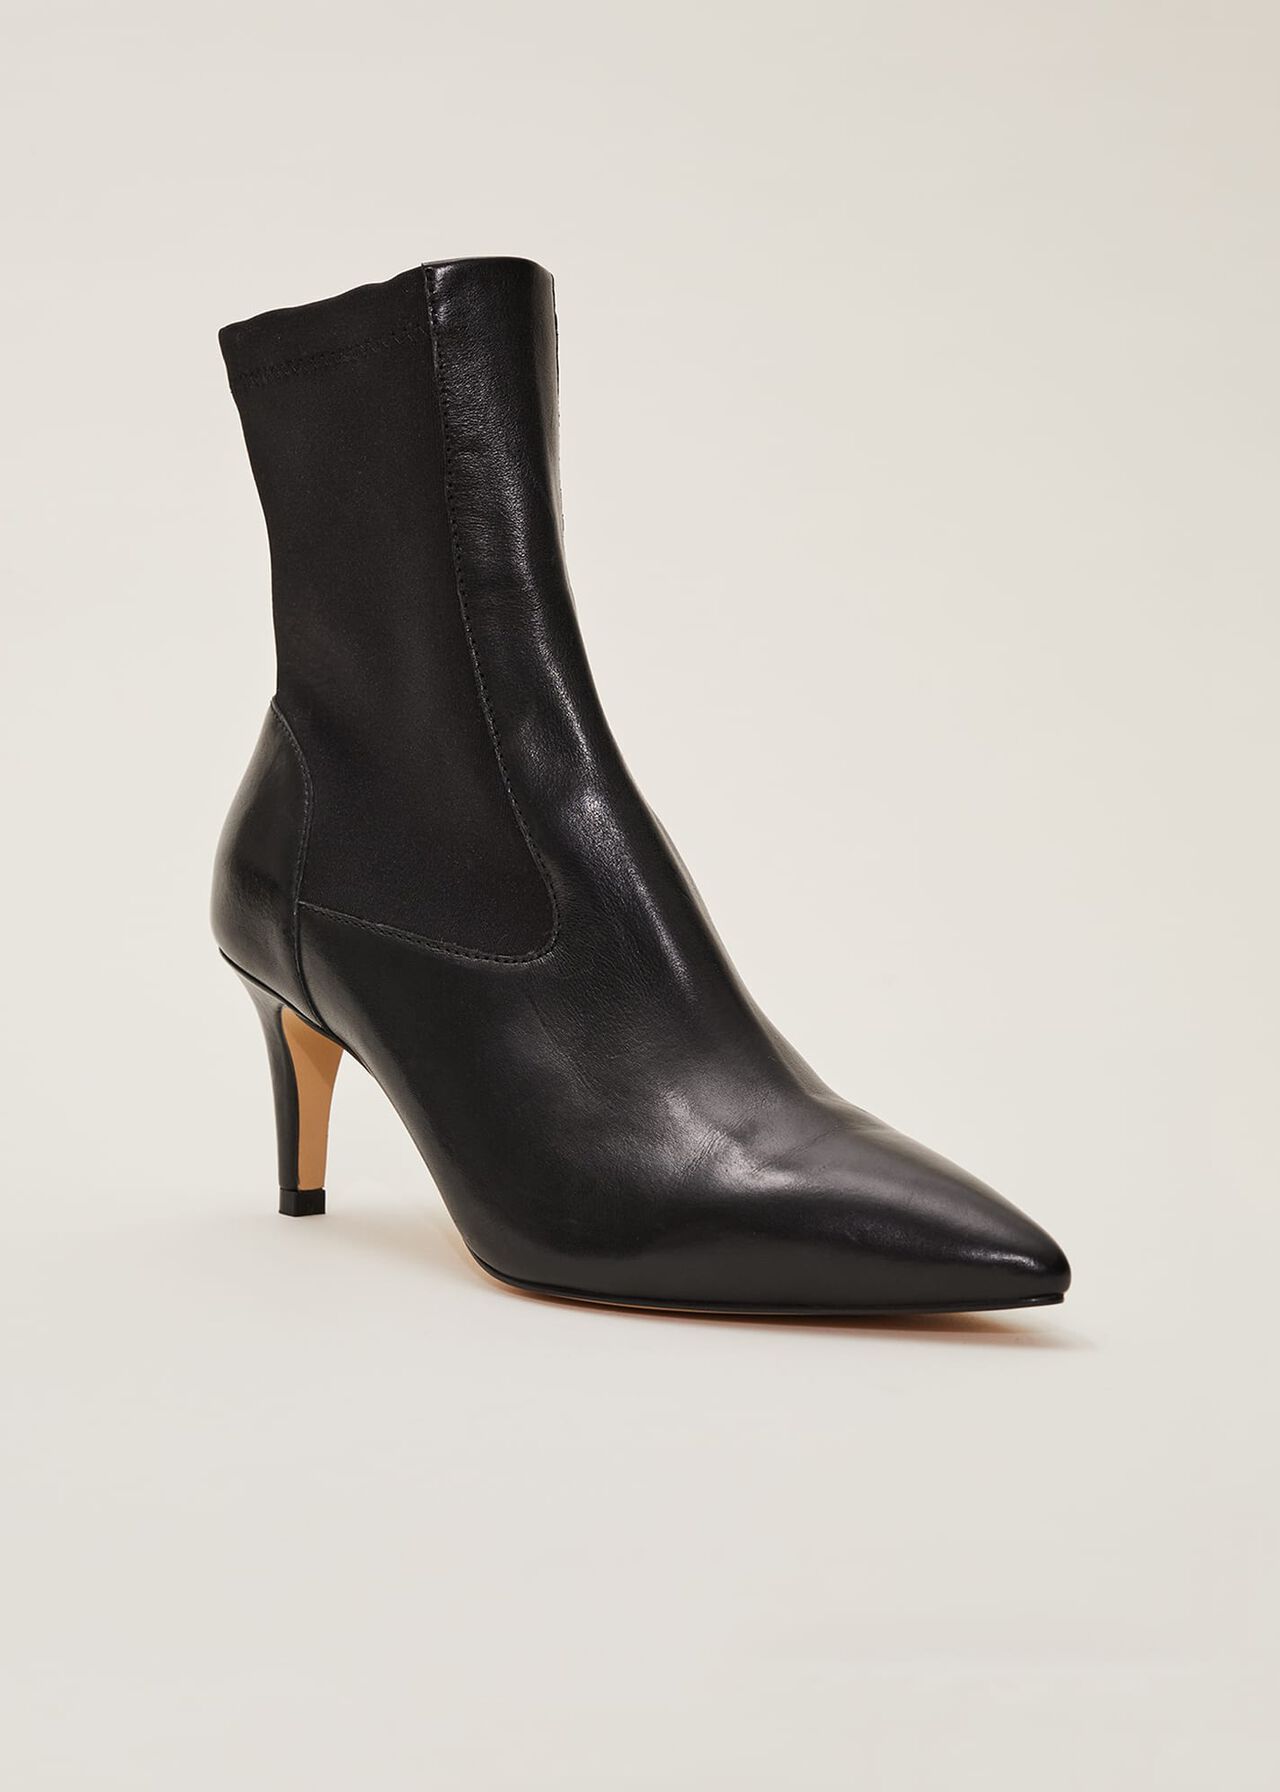 Dolly Black Leather Sock Boots